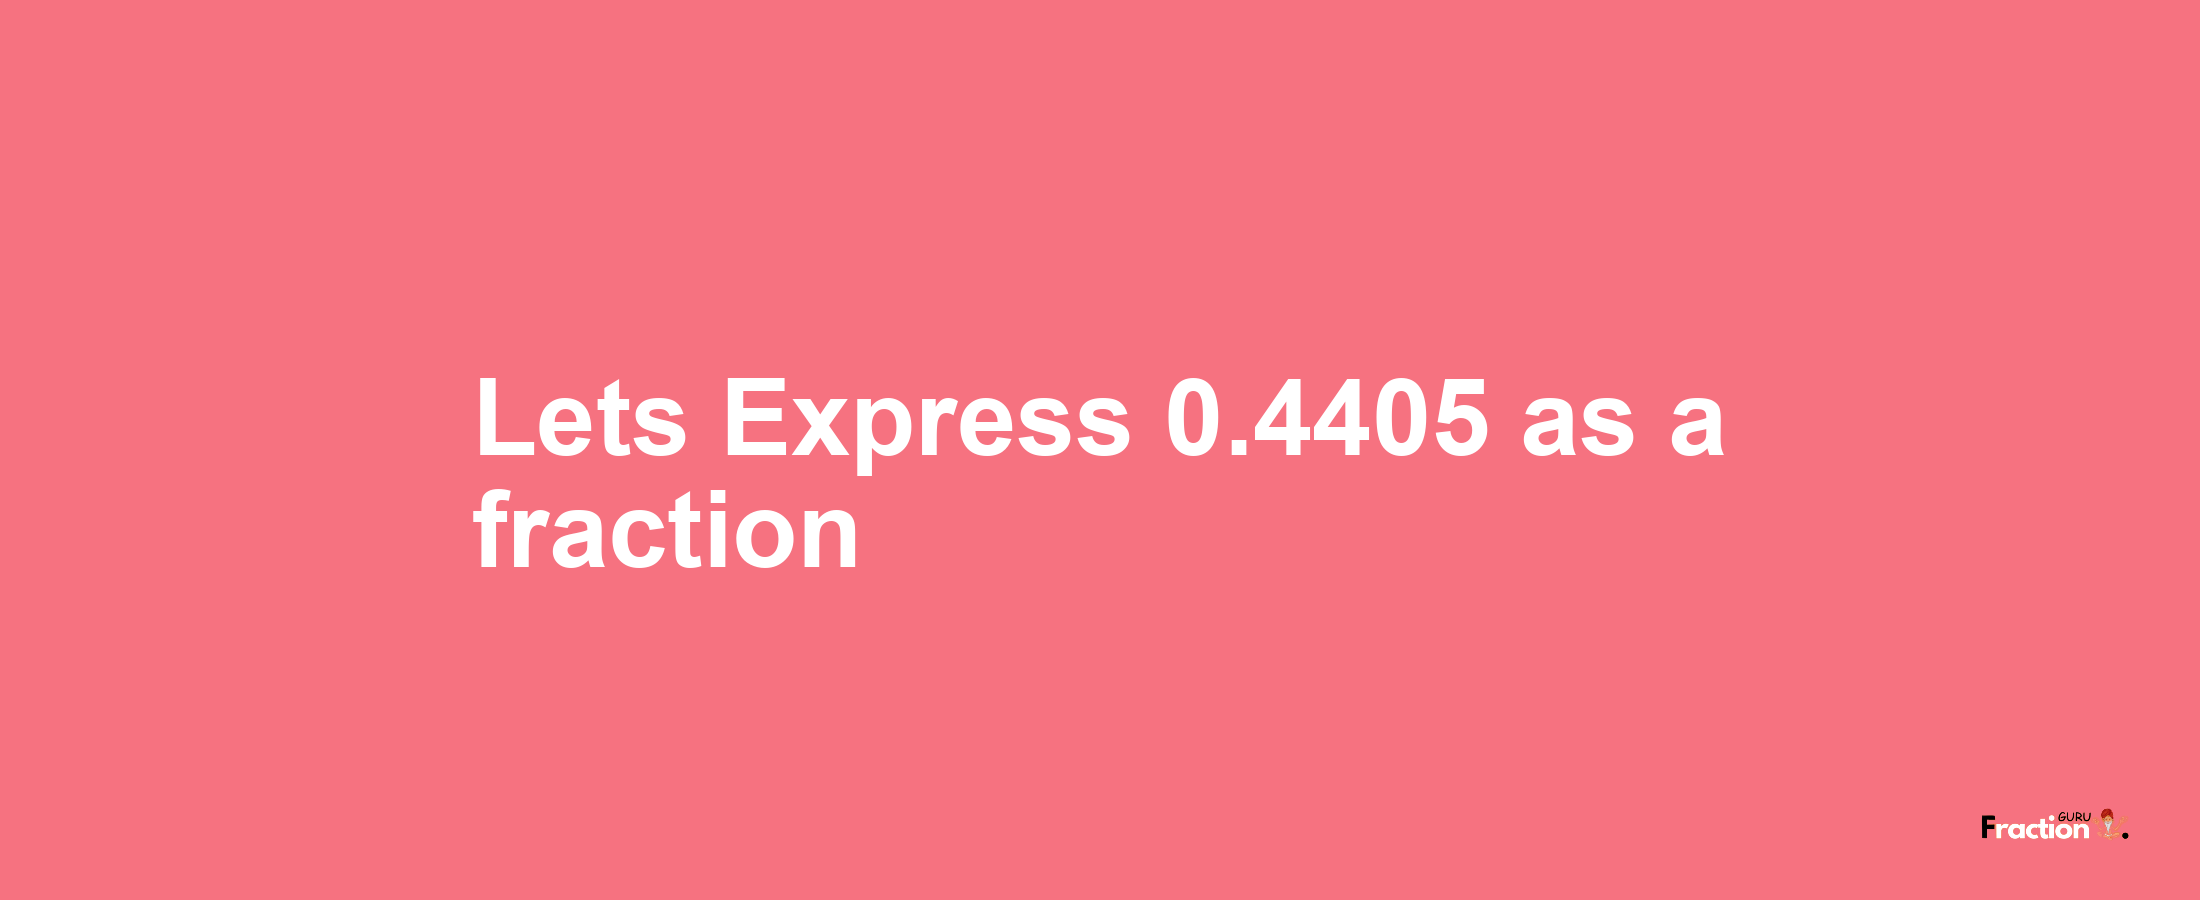 Lets Express 0.4405 as afraction